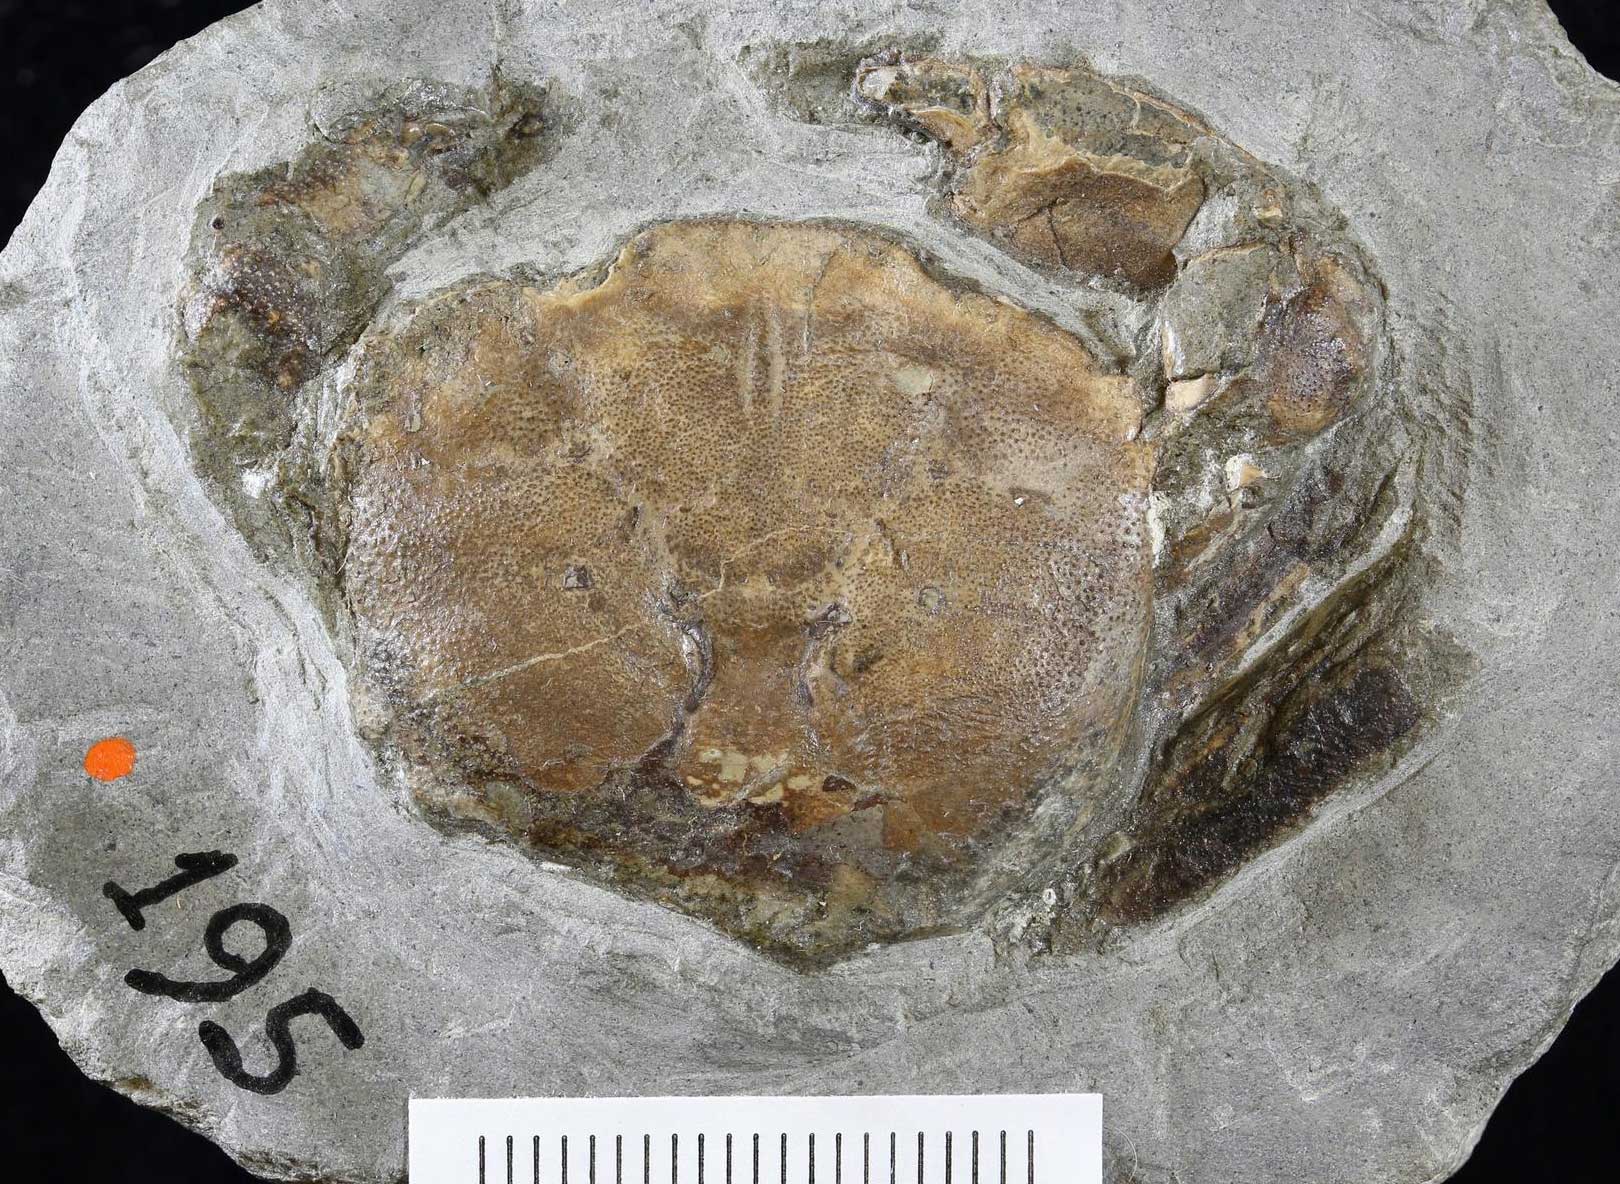 Photograph of a concretion containing a fossil crab from the Oligocene of Oregon. The concretion is a round, gray rock that has been spilt open to show a light brown crab. The body, part of the pinchers, and part of the legs of the crab on the right side of its body can be seen.